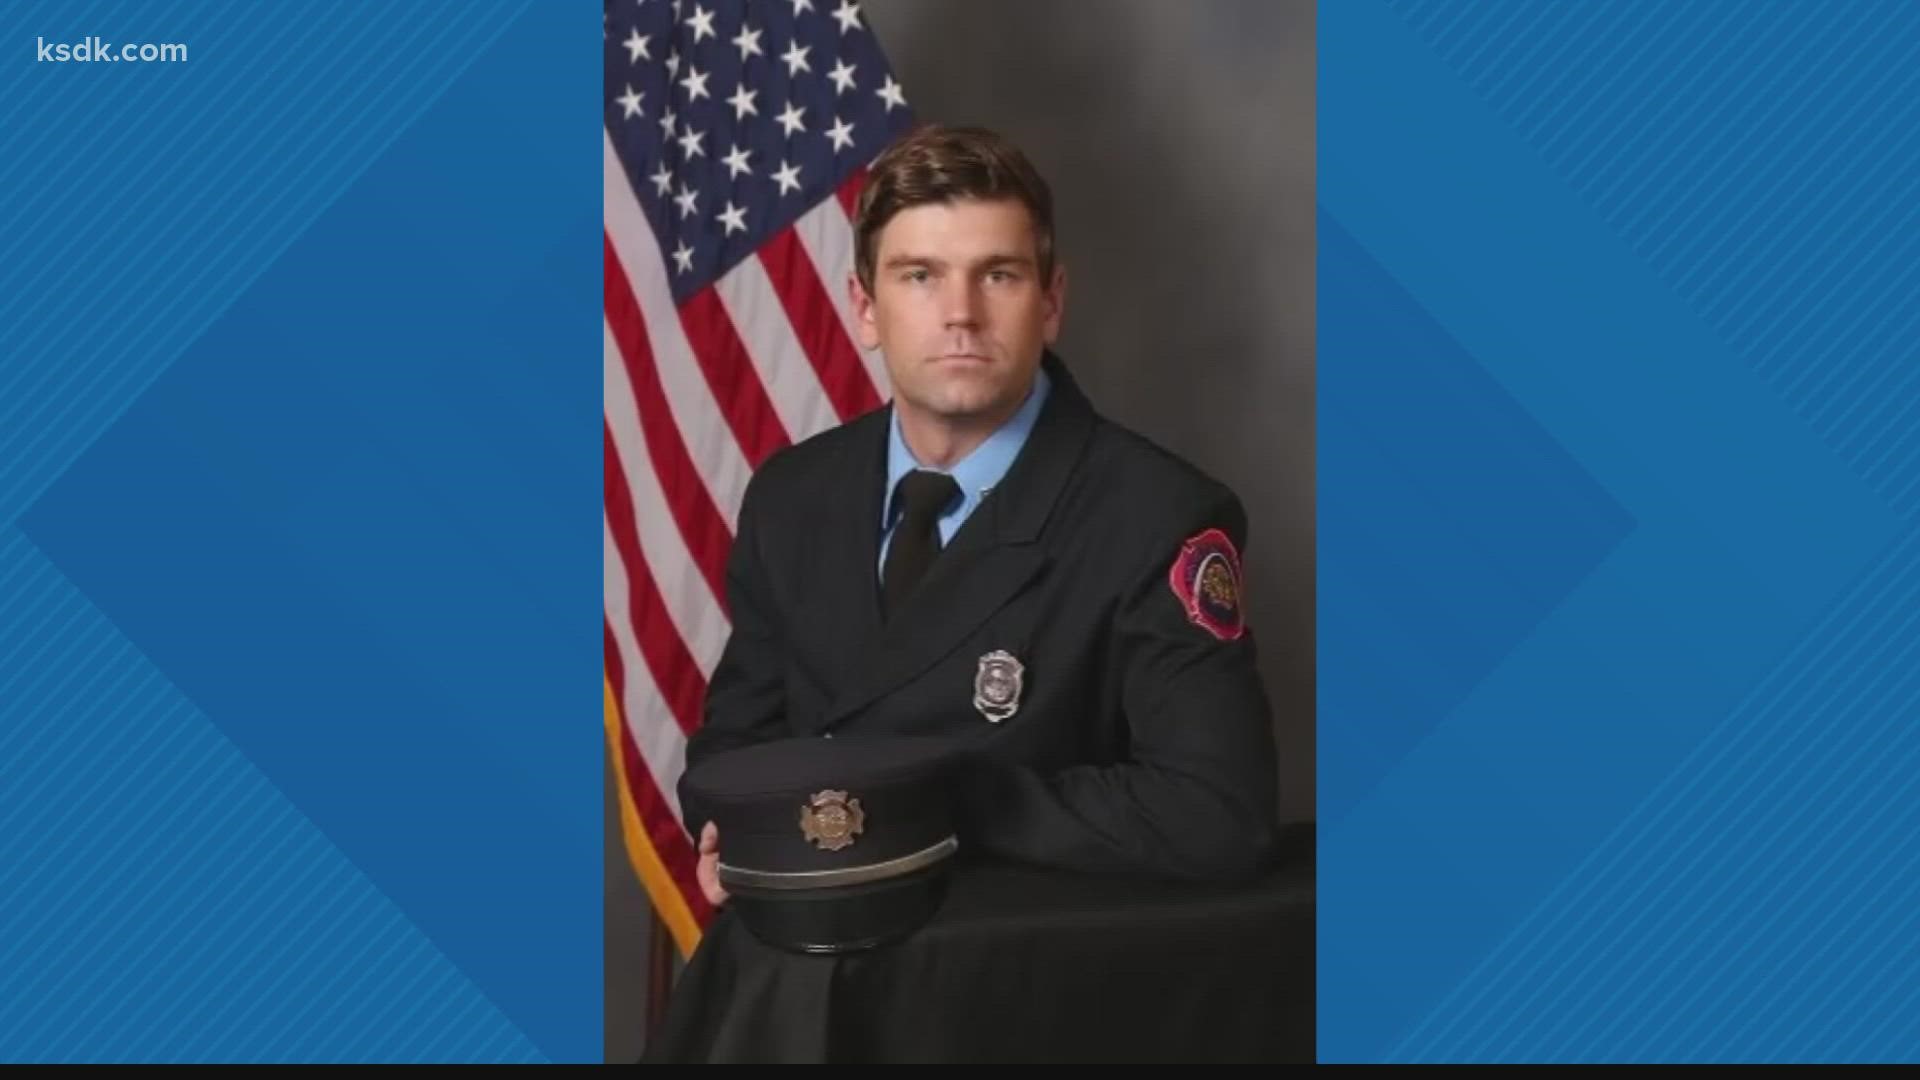 Support is pouring in for a St. Louis Firefighter who died in the line of duty. Thursday, a roof collapsed at a vacant home that was on fire killing him.